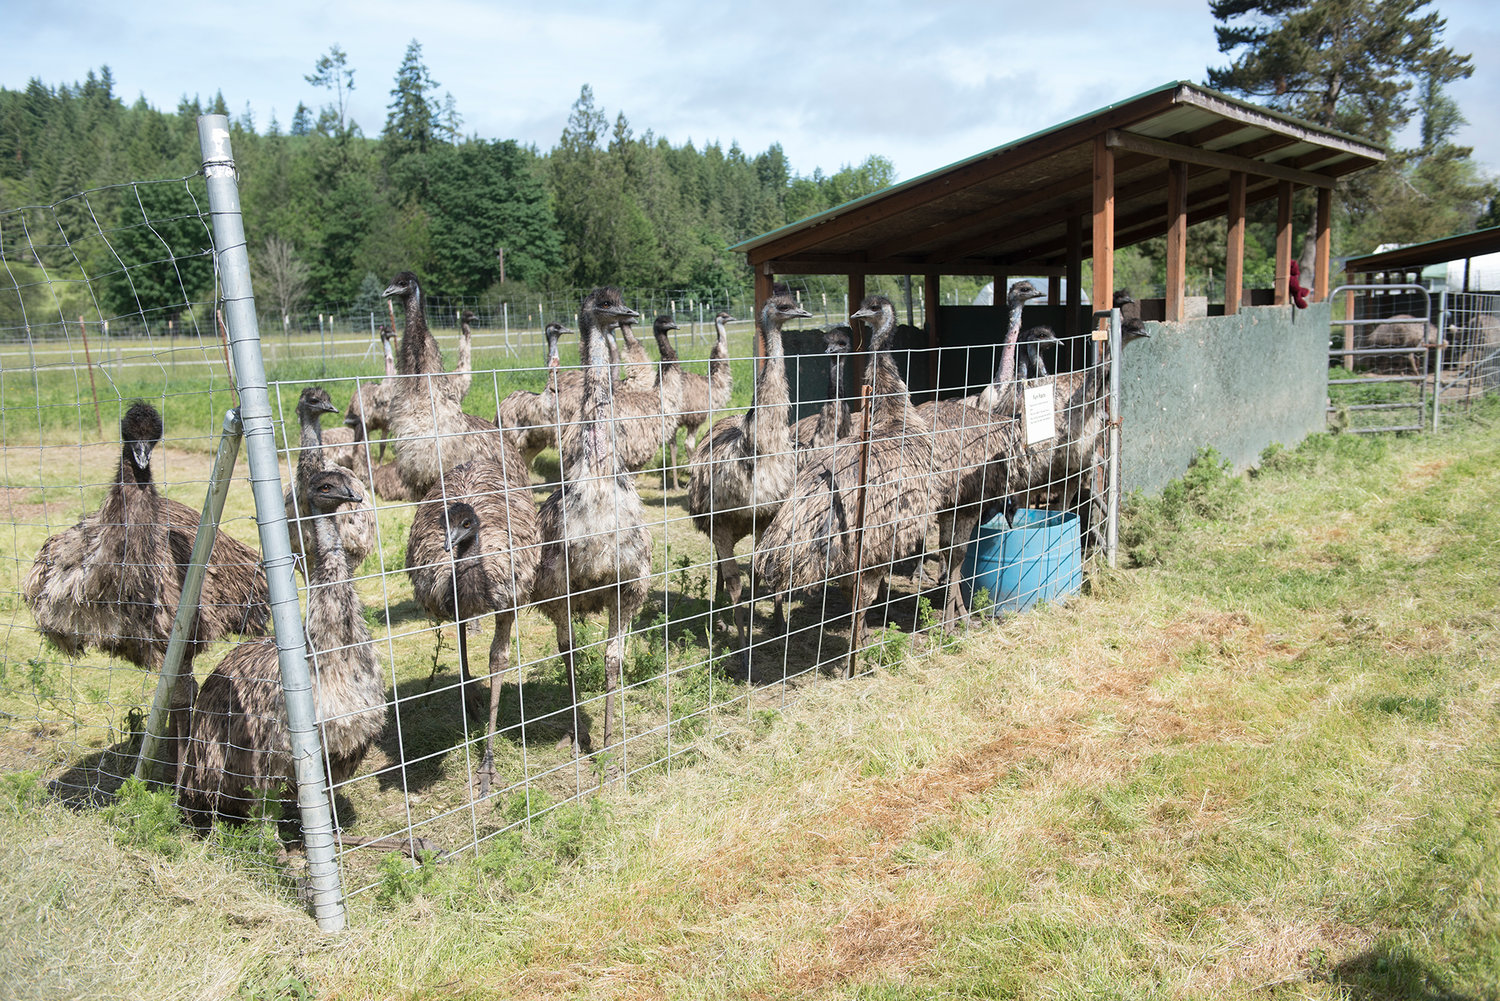 A contingent of emus stand at attention during 3 Feather Emu Ranch’s Spring Visit Day on June 1, 2019.